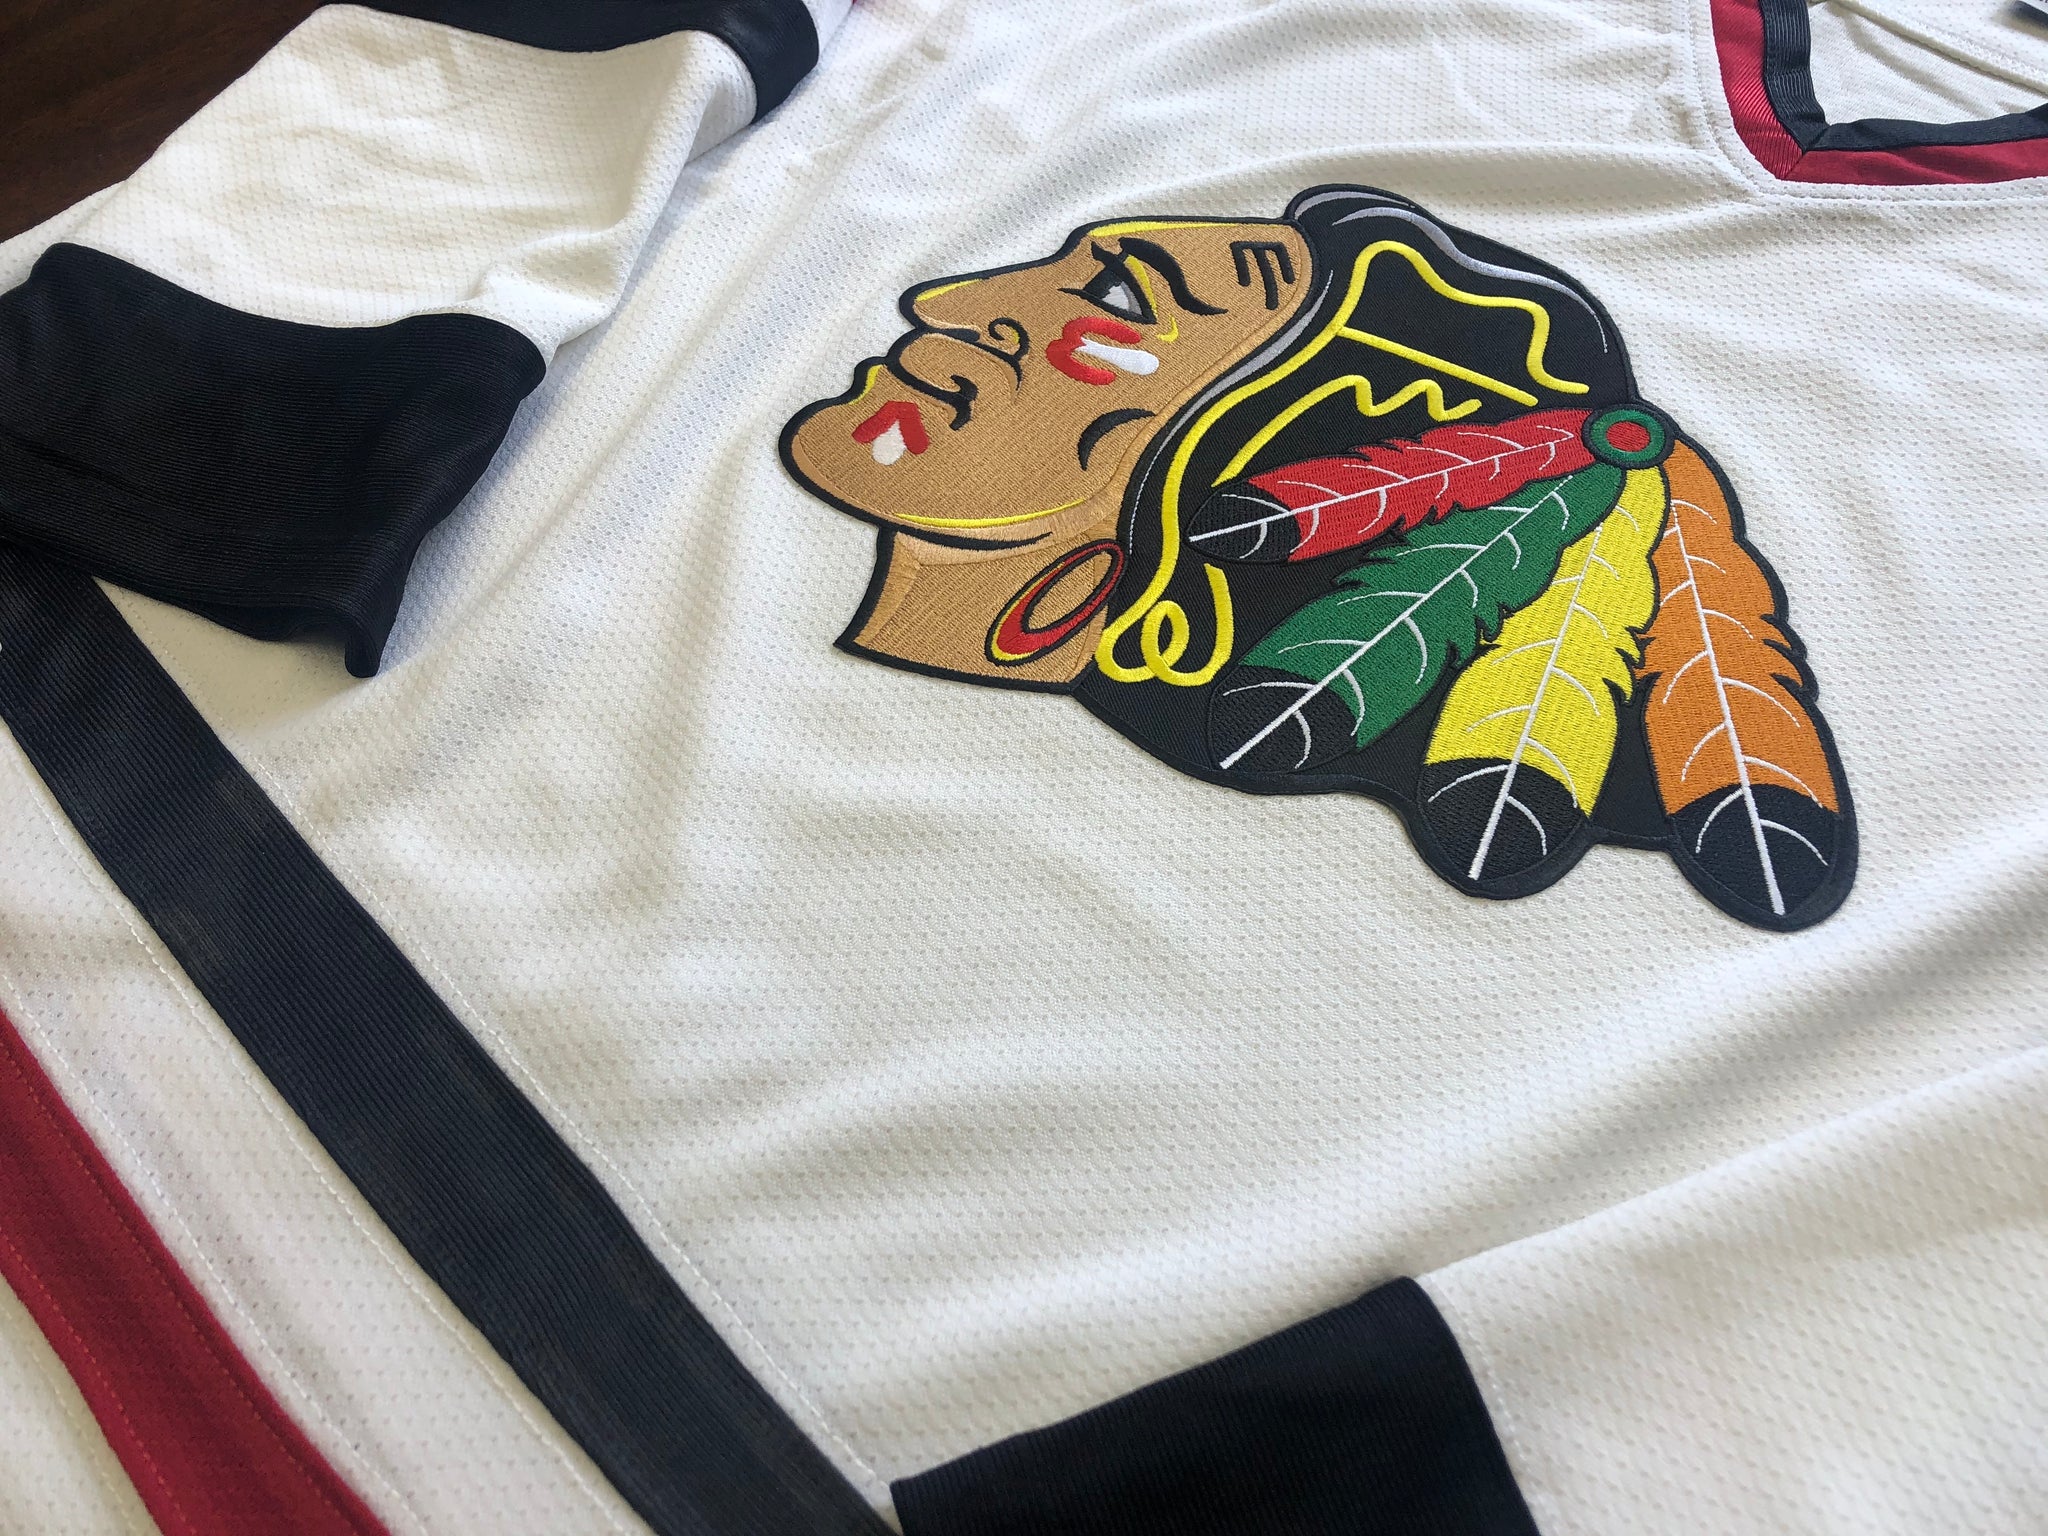 chicago blackhawks griswold jersey